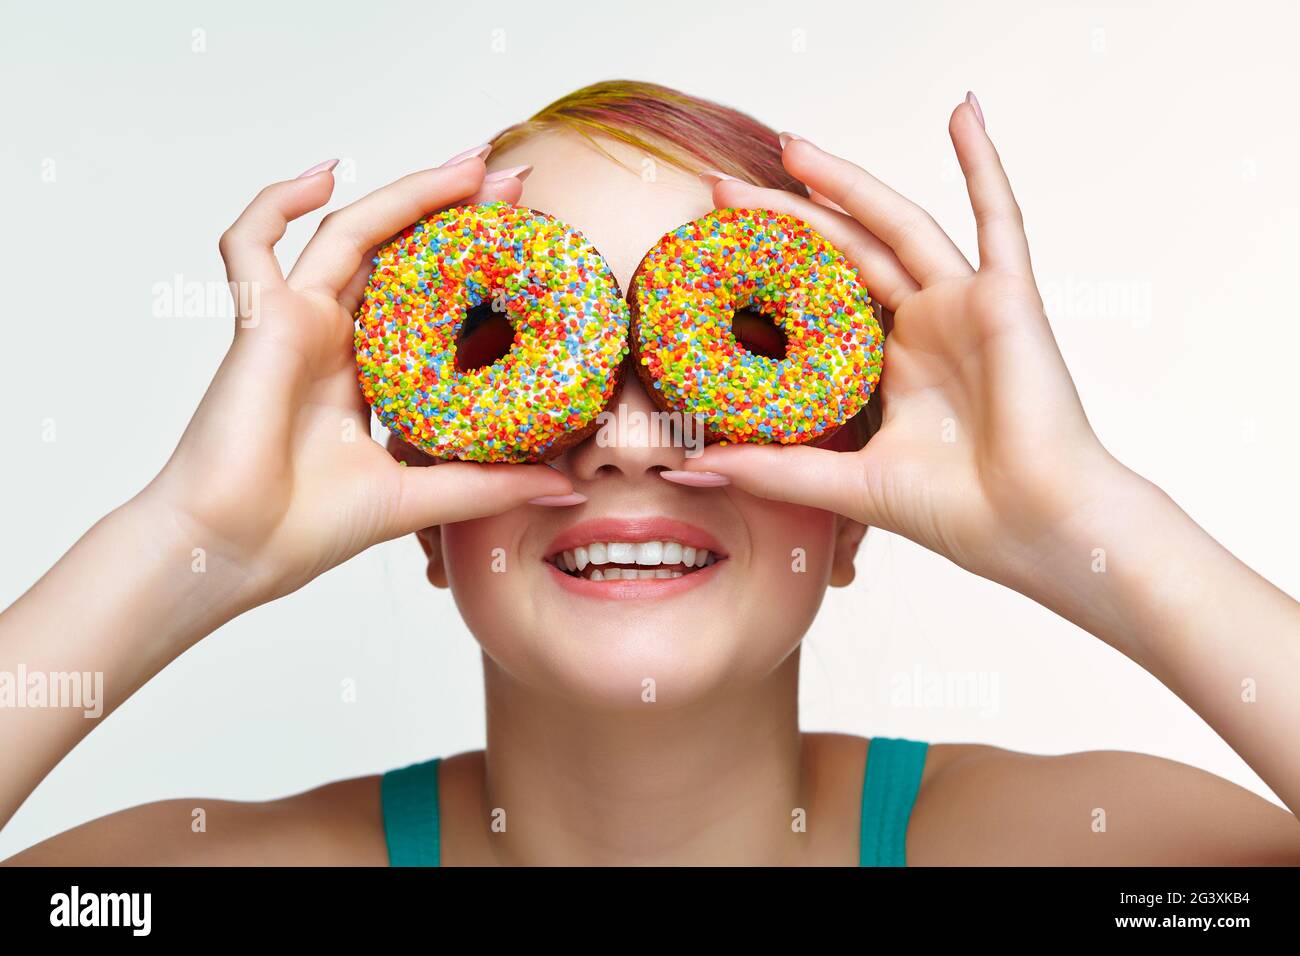 Teenager girl with unusual face art make-up . Child looking through holes in donuts. Stock Photo